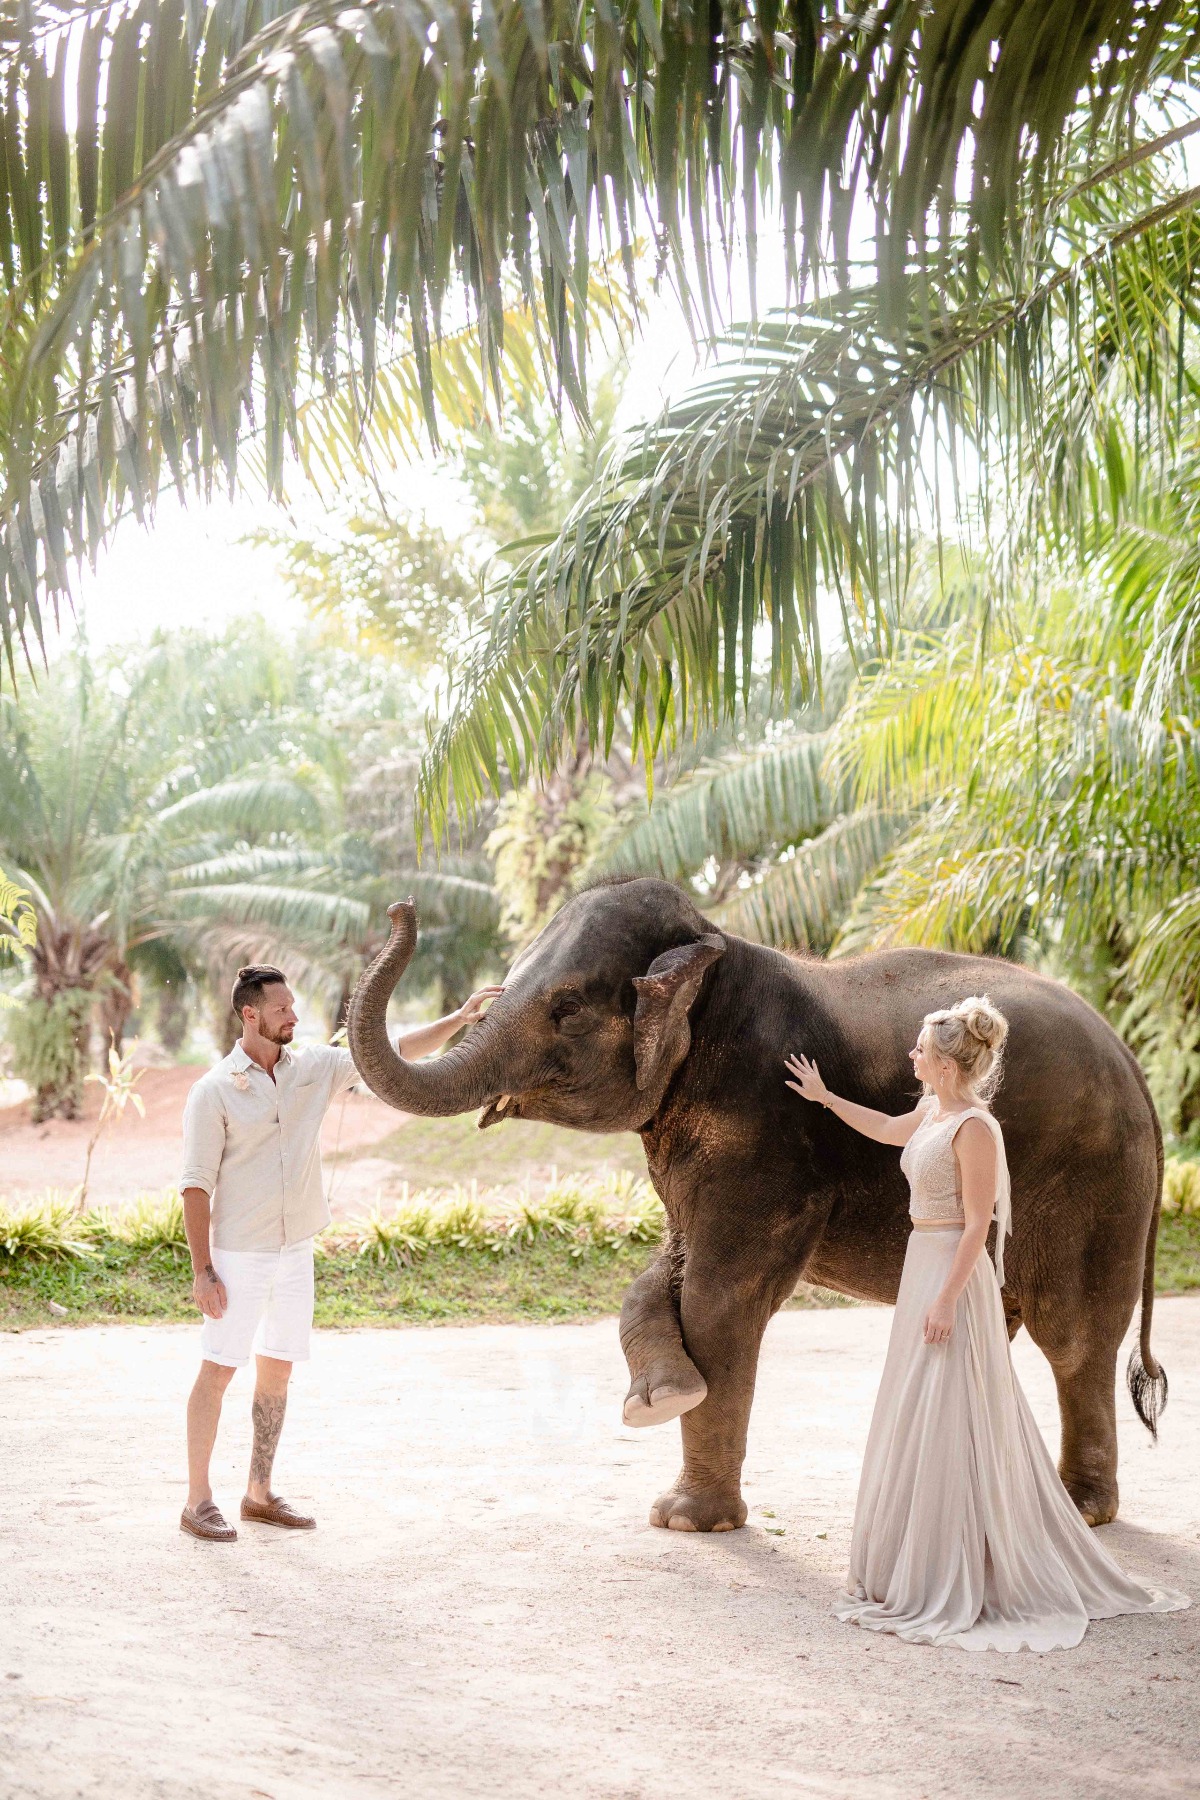 You Know Your Wedding Is Epic When One Of Your Guests Is An Elephant (Literally!)